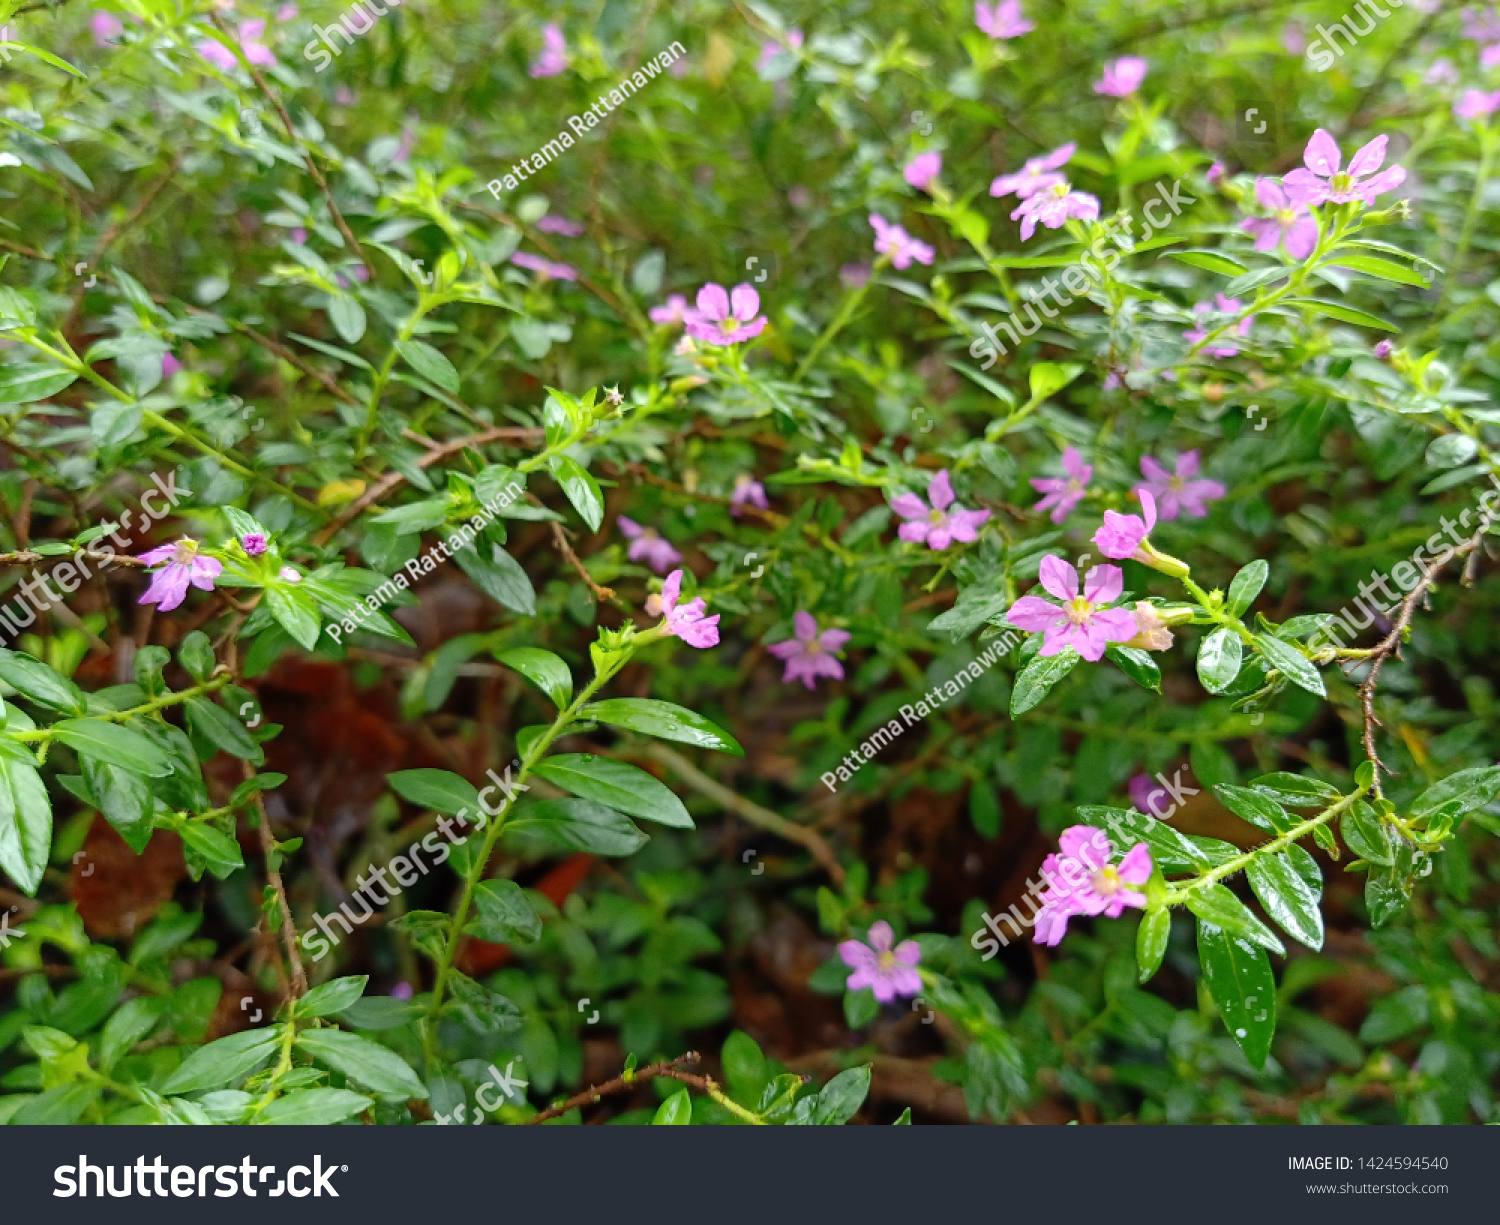 Natural plant of Cuphea hyssopifolia, the false heather, Mexican heather, Hawaiian heather or elfin herb,A small shrub radiates a low slung a Brown stem. Dark green leaves with a pointed spear shape. #1424594540